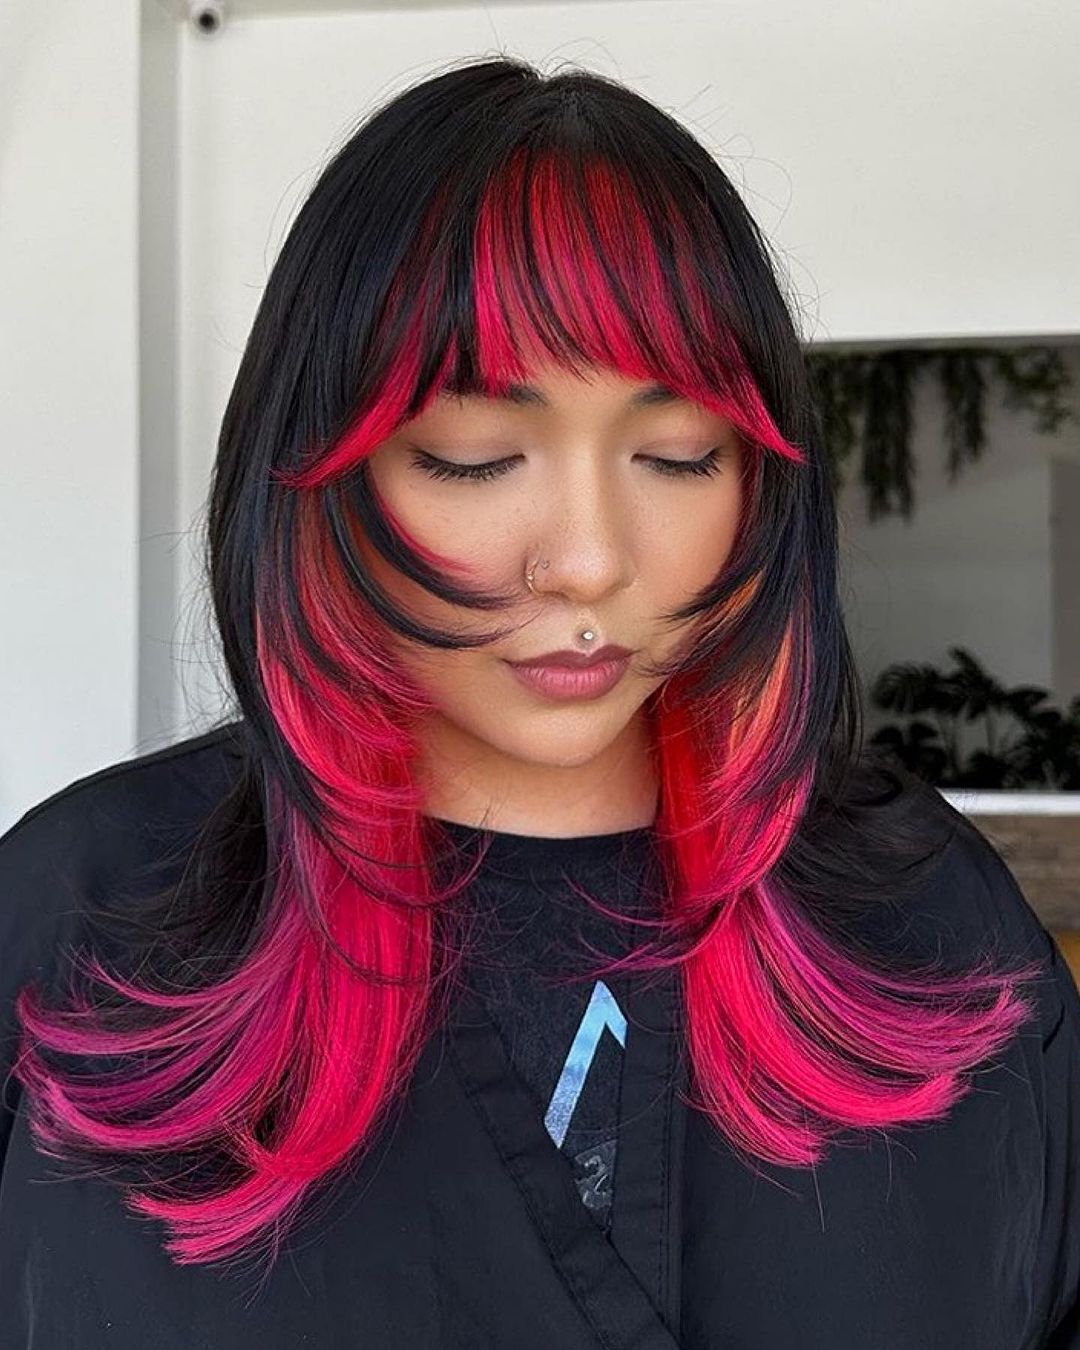 dragonfruit butterfly cut with bangs